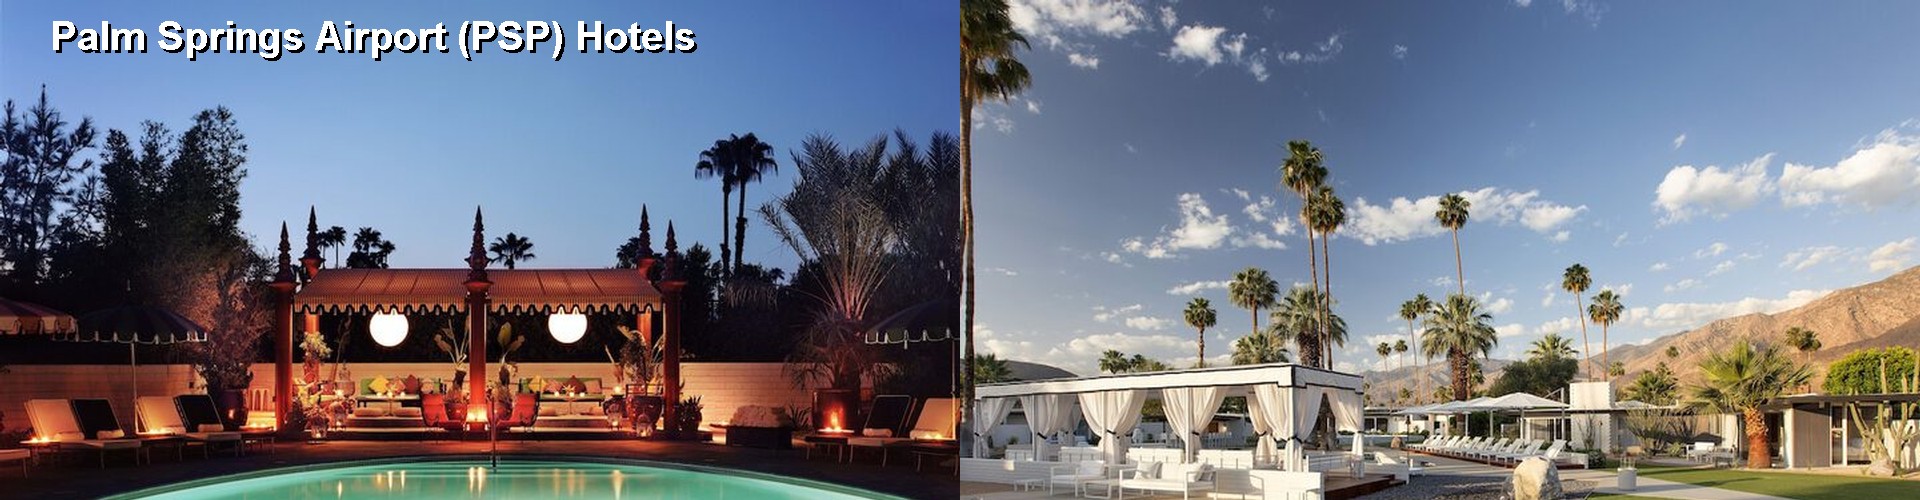 5 Best Hotels near Palm Springs Airport (PSP)